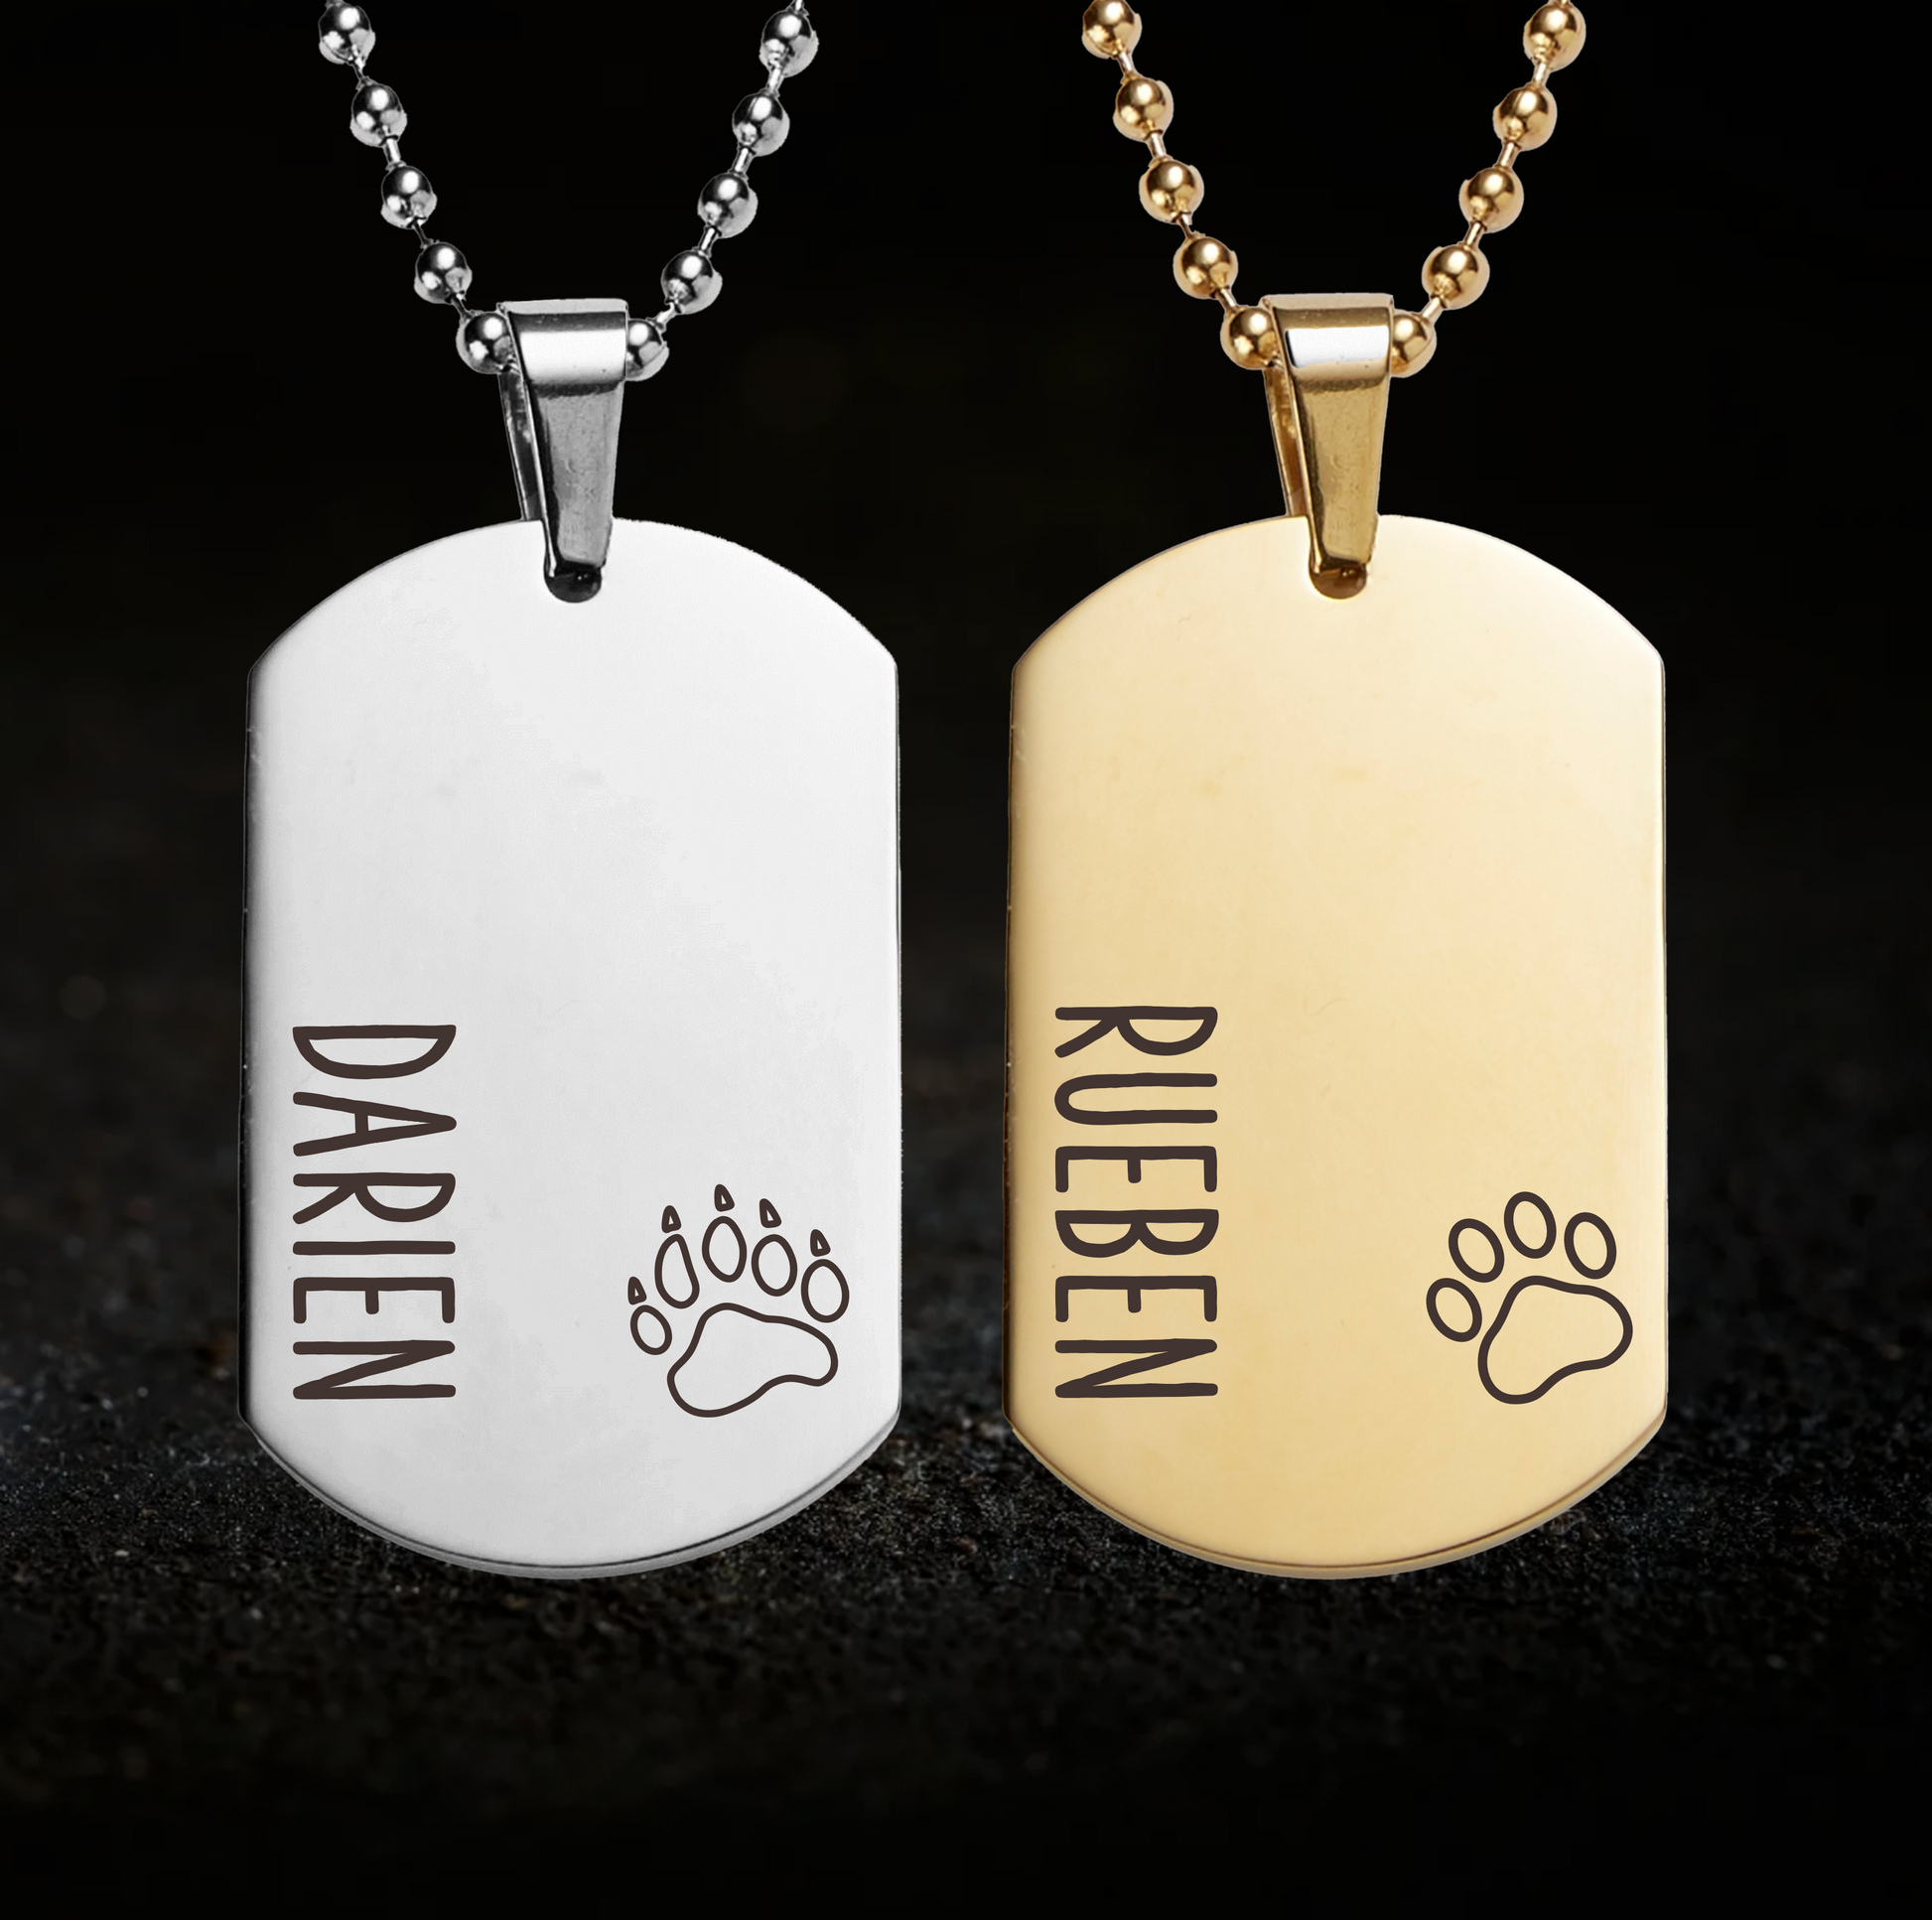 Personalise Bear and Cub Necklace Set